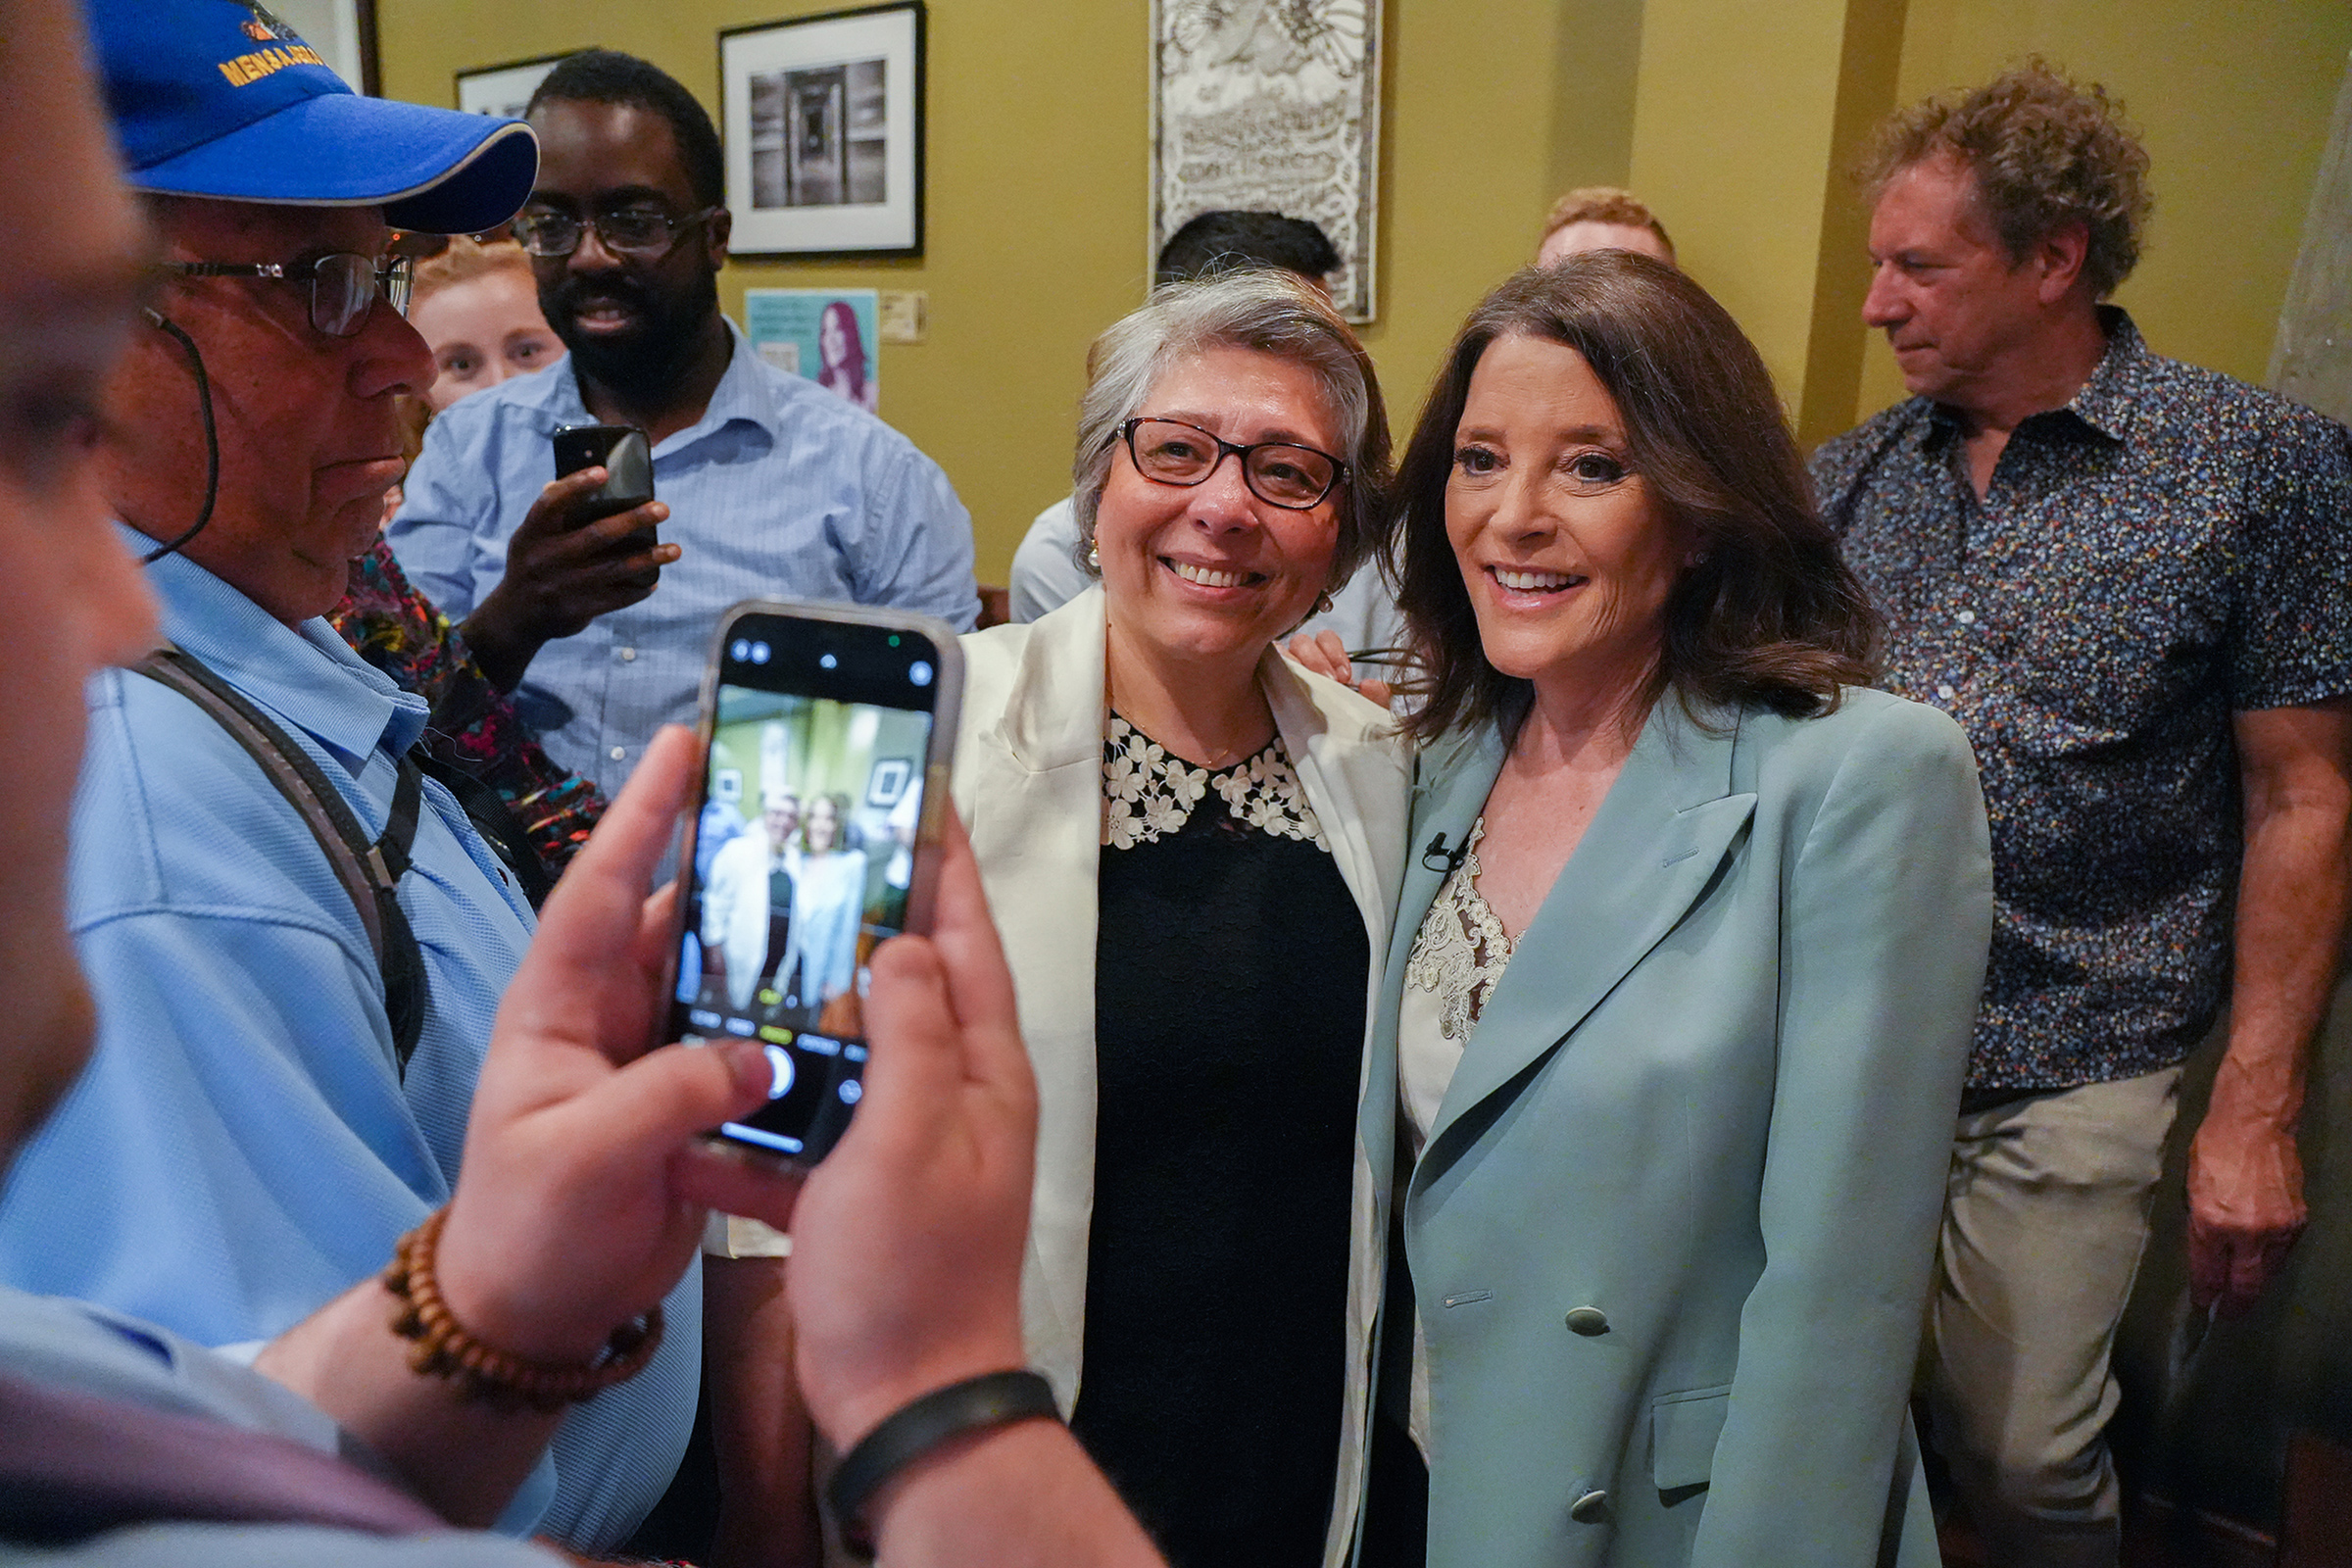 Marianne Williamson holds a fundraiser and meet and greet with supporters at Busboys and Poets, Washington D.C., on May 11. (Megan Smith—USA TODAY/Reuters)